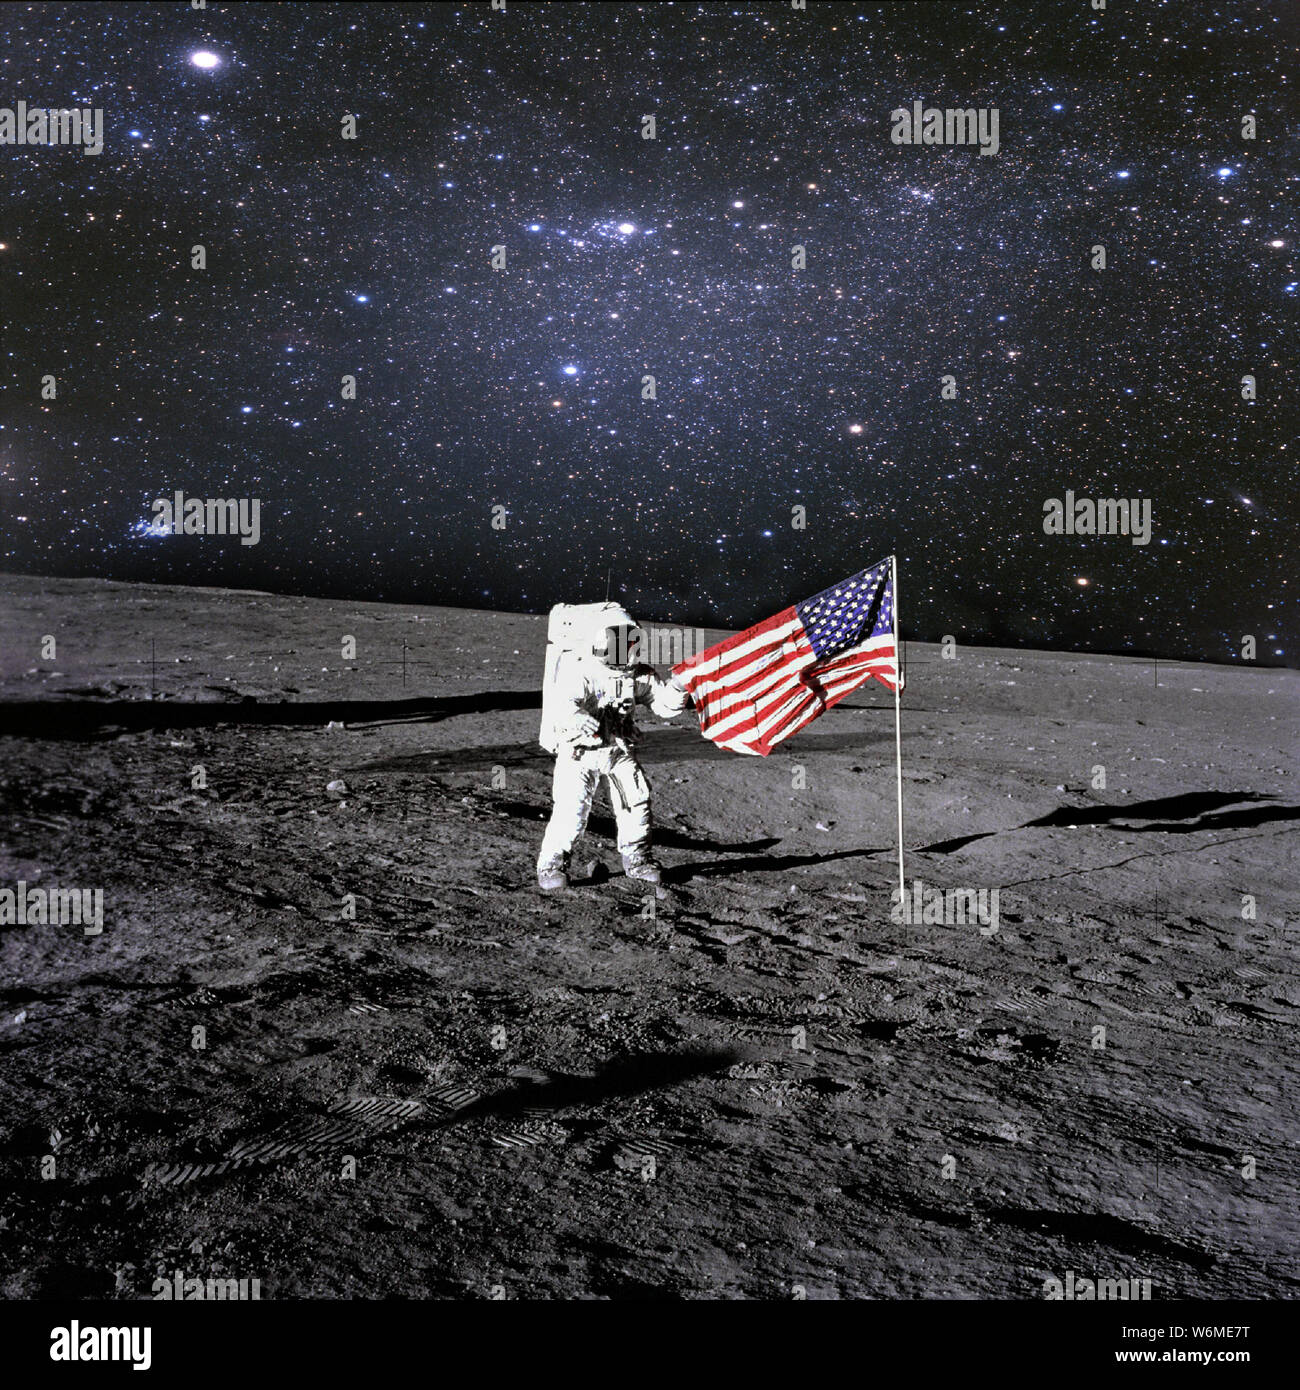 American astronaut landed and set his national flag on the planet. Spaceman explore unknown planet. Elements of this image furnished by NASA Stock Photo